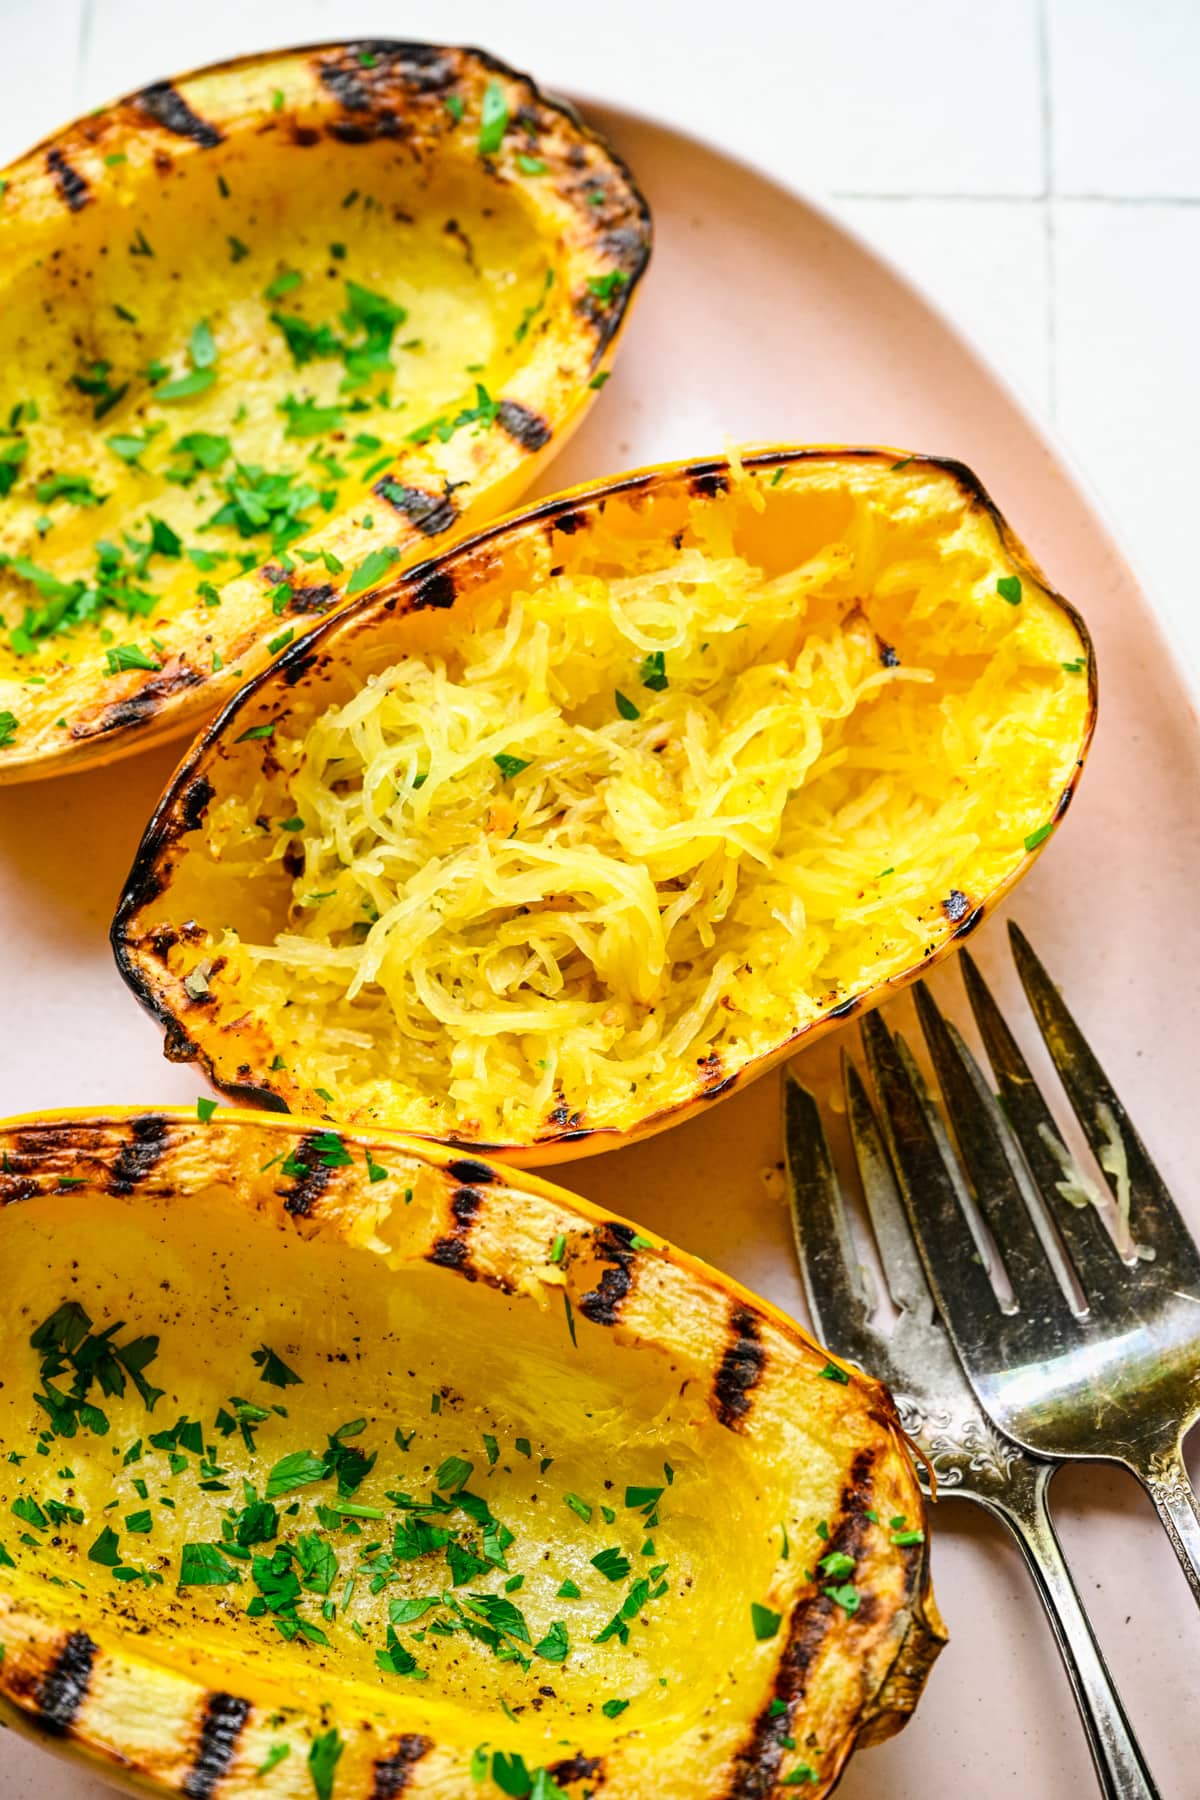 Overhead view of finished spaghetti squash on a pink platter.